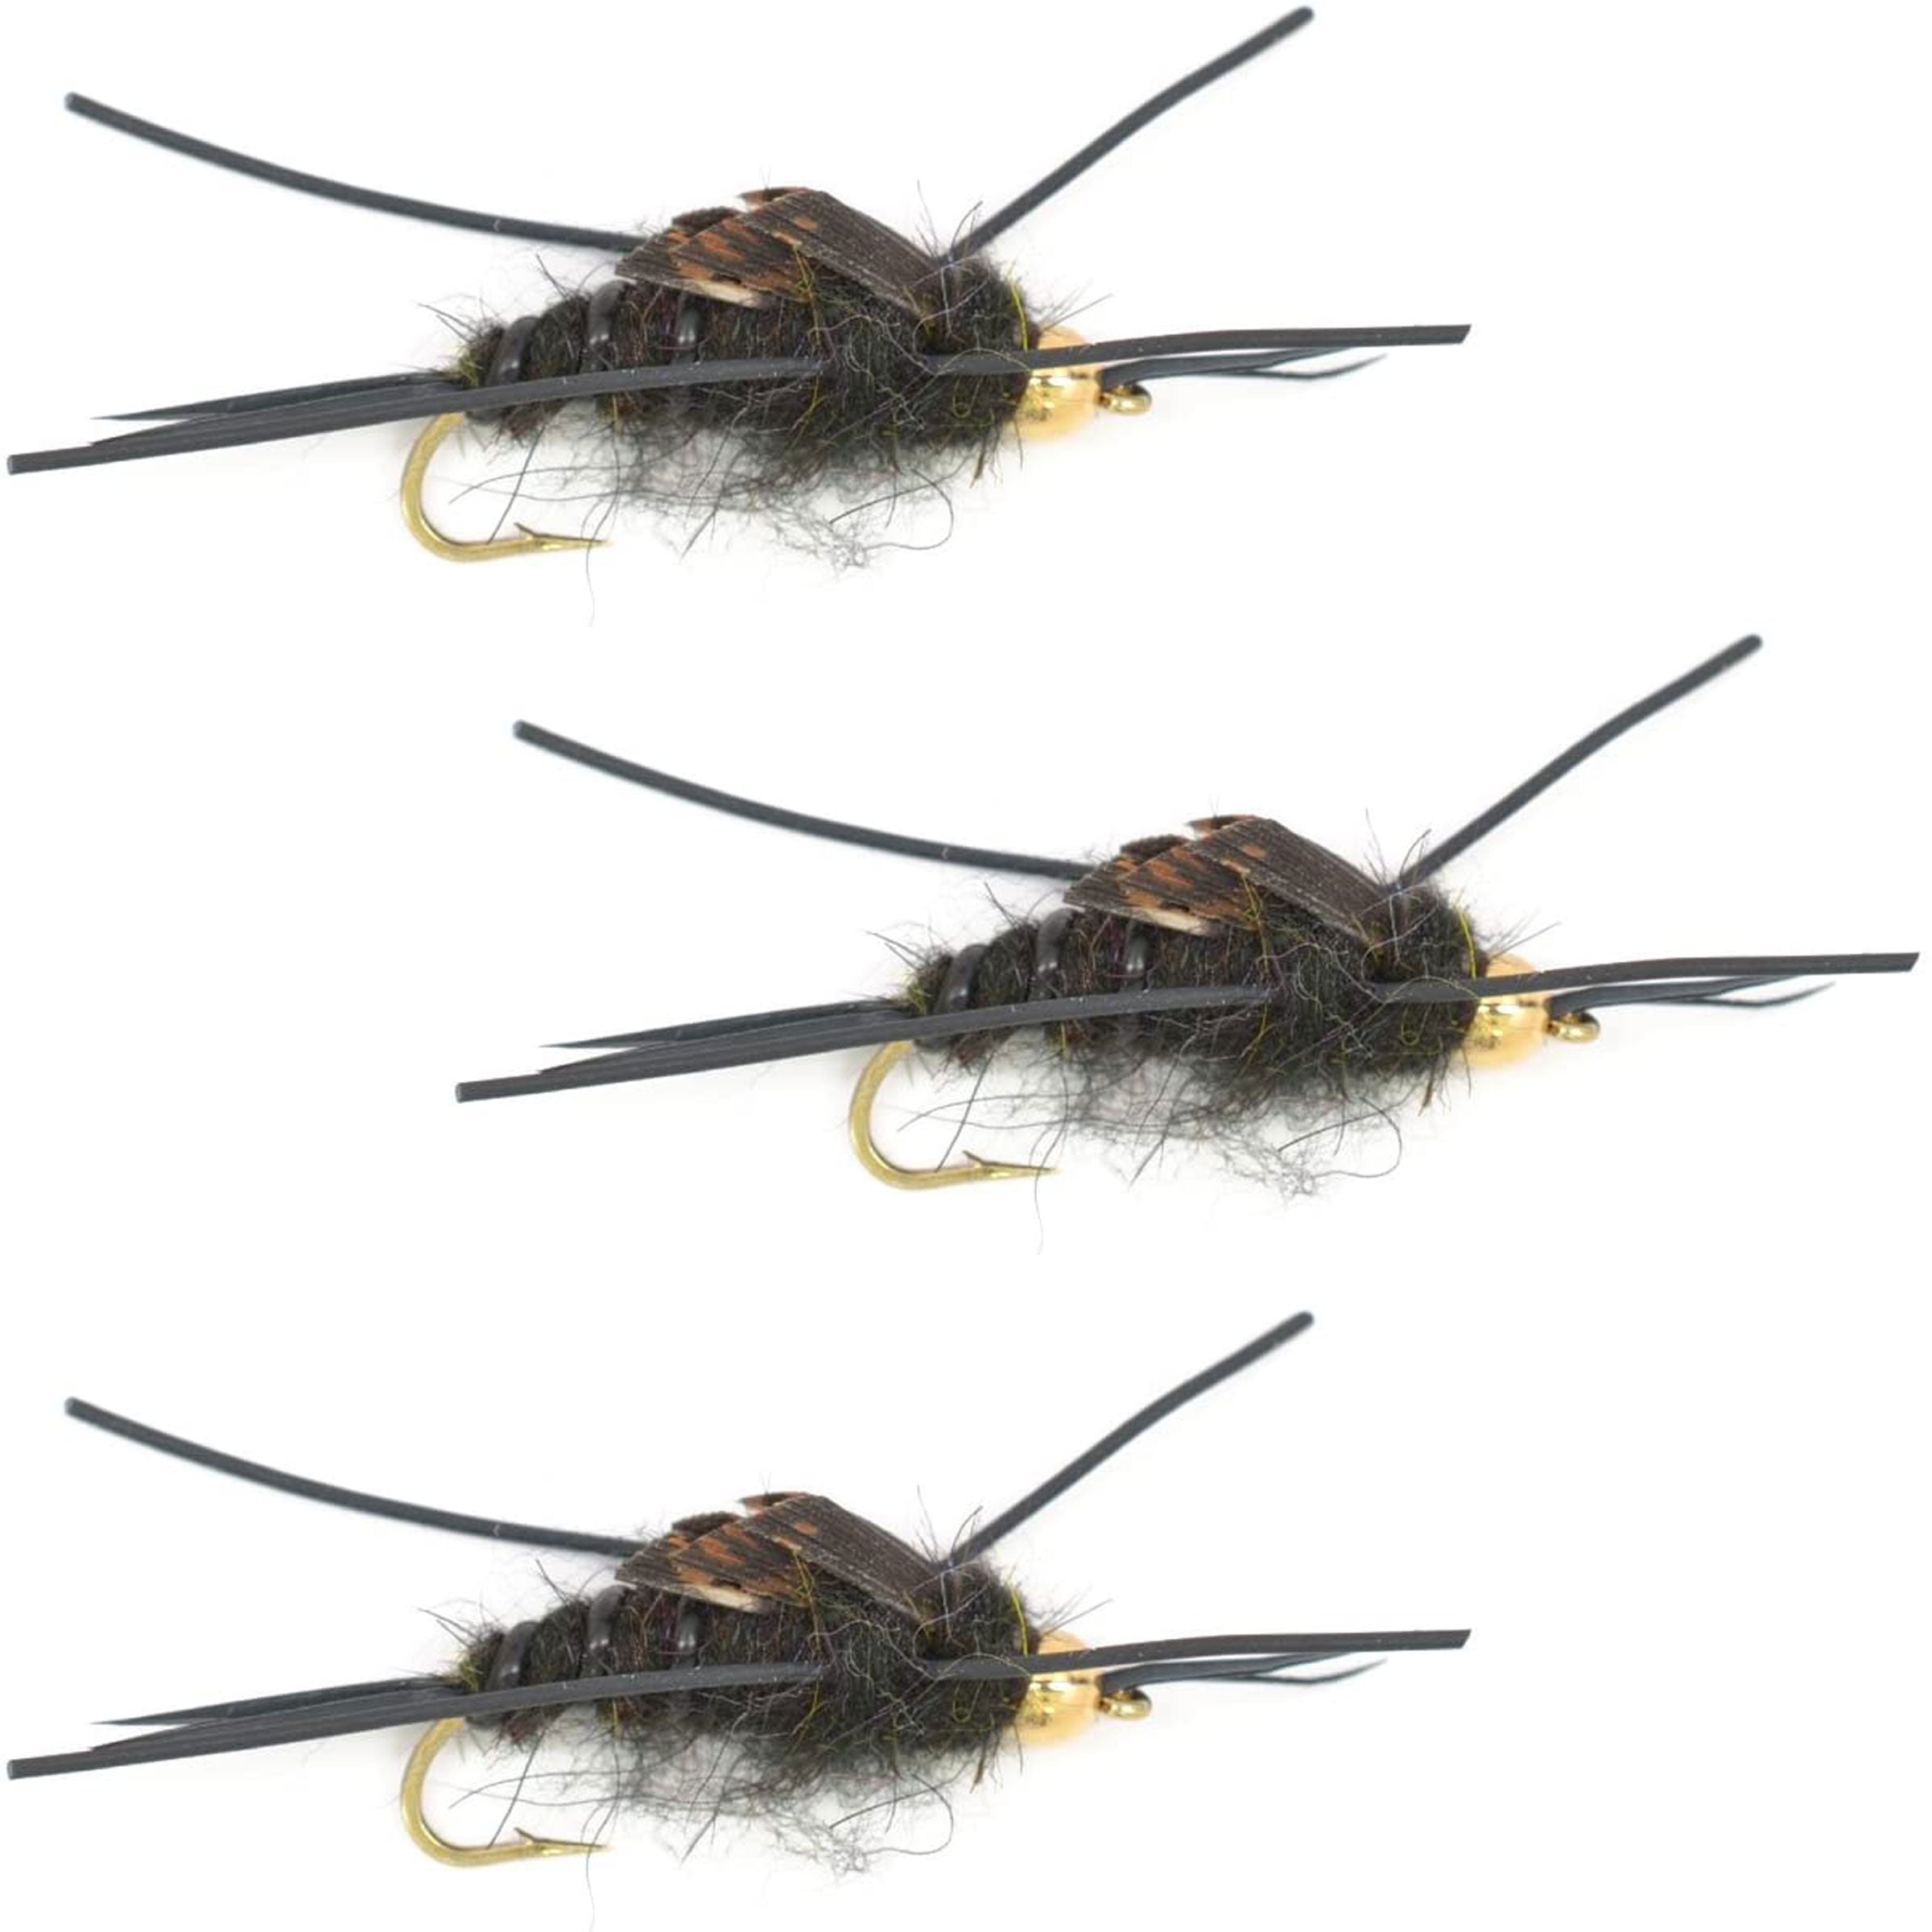 3 Pack Tungsten Bead Kaufmann's Black Stone Fly with Rubber Legs - Stonefly Wet Fly - Hook Size 12